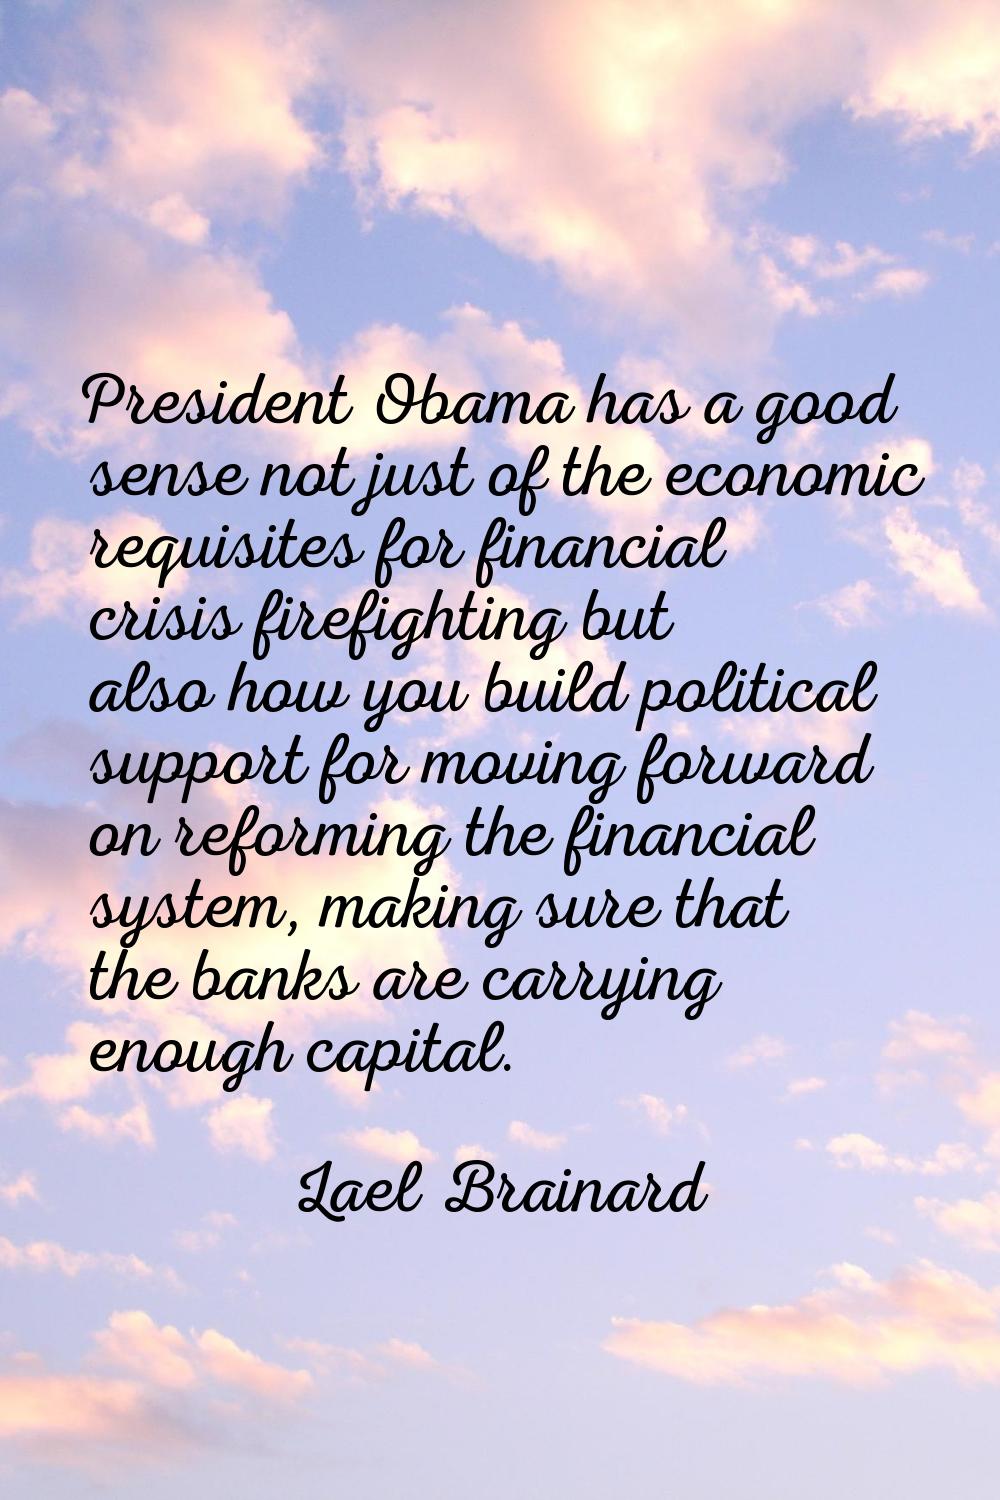 President Obama has a good sense not just of the economic requisites for financial crisis firefight